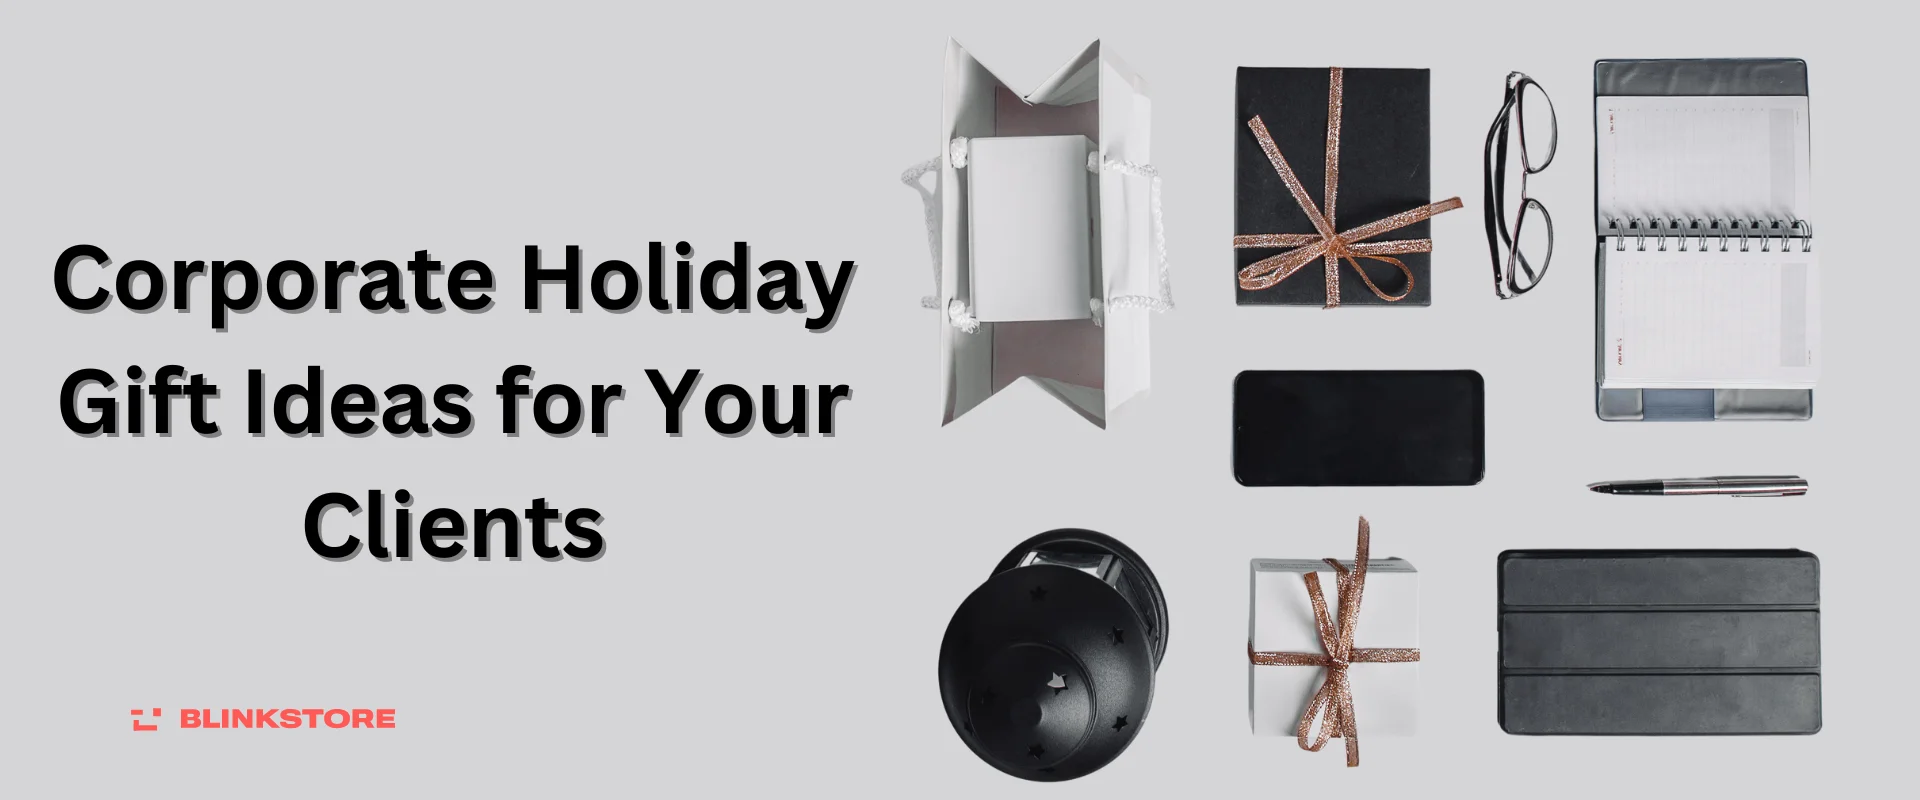 Corporate Holiday Gift Ideas for Your Clients